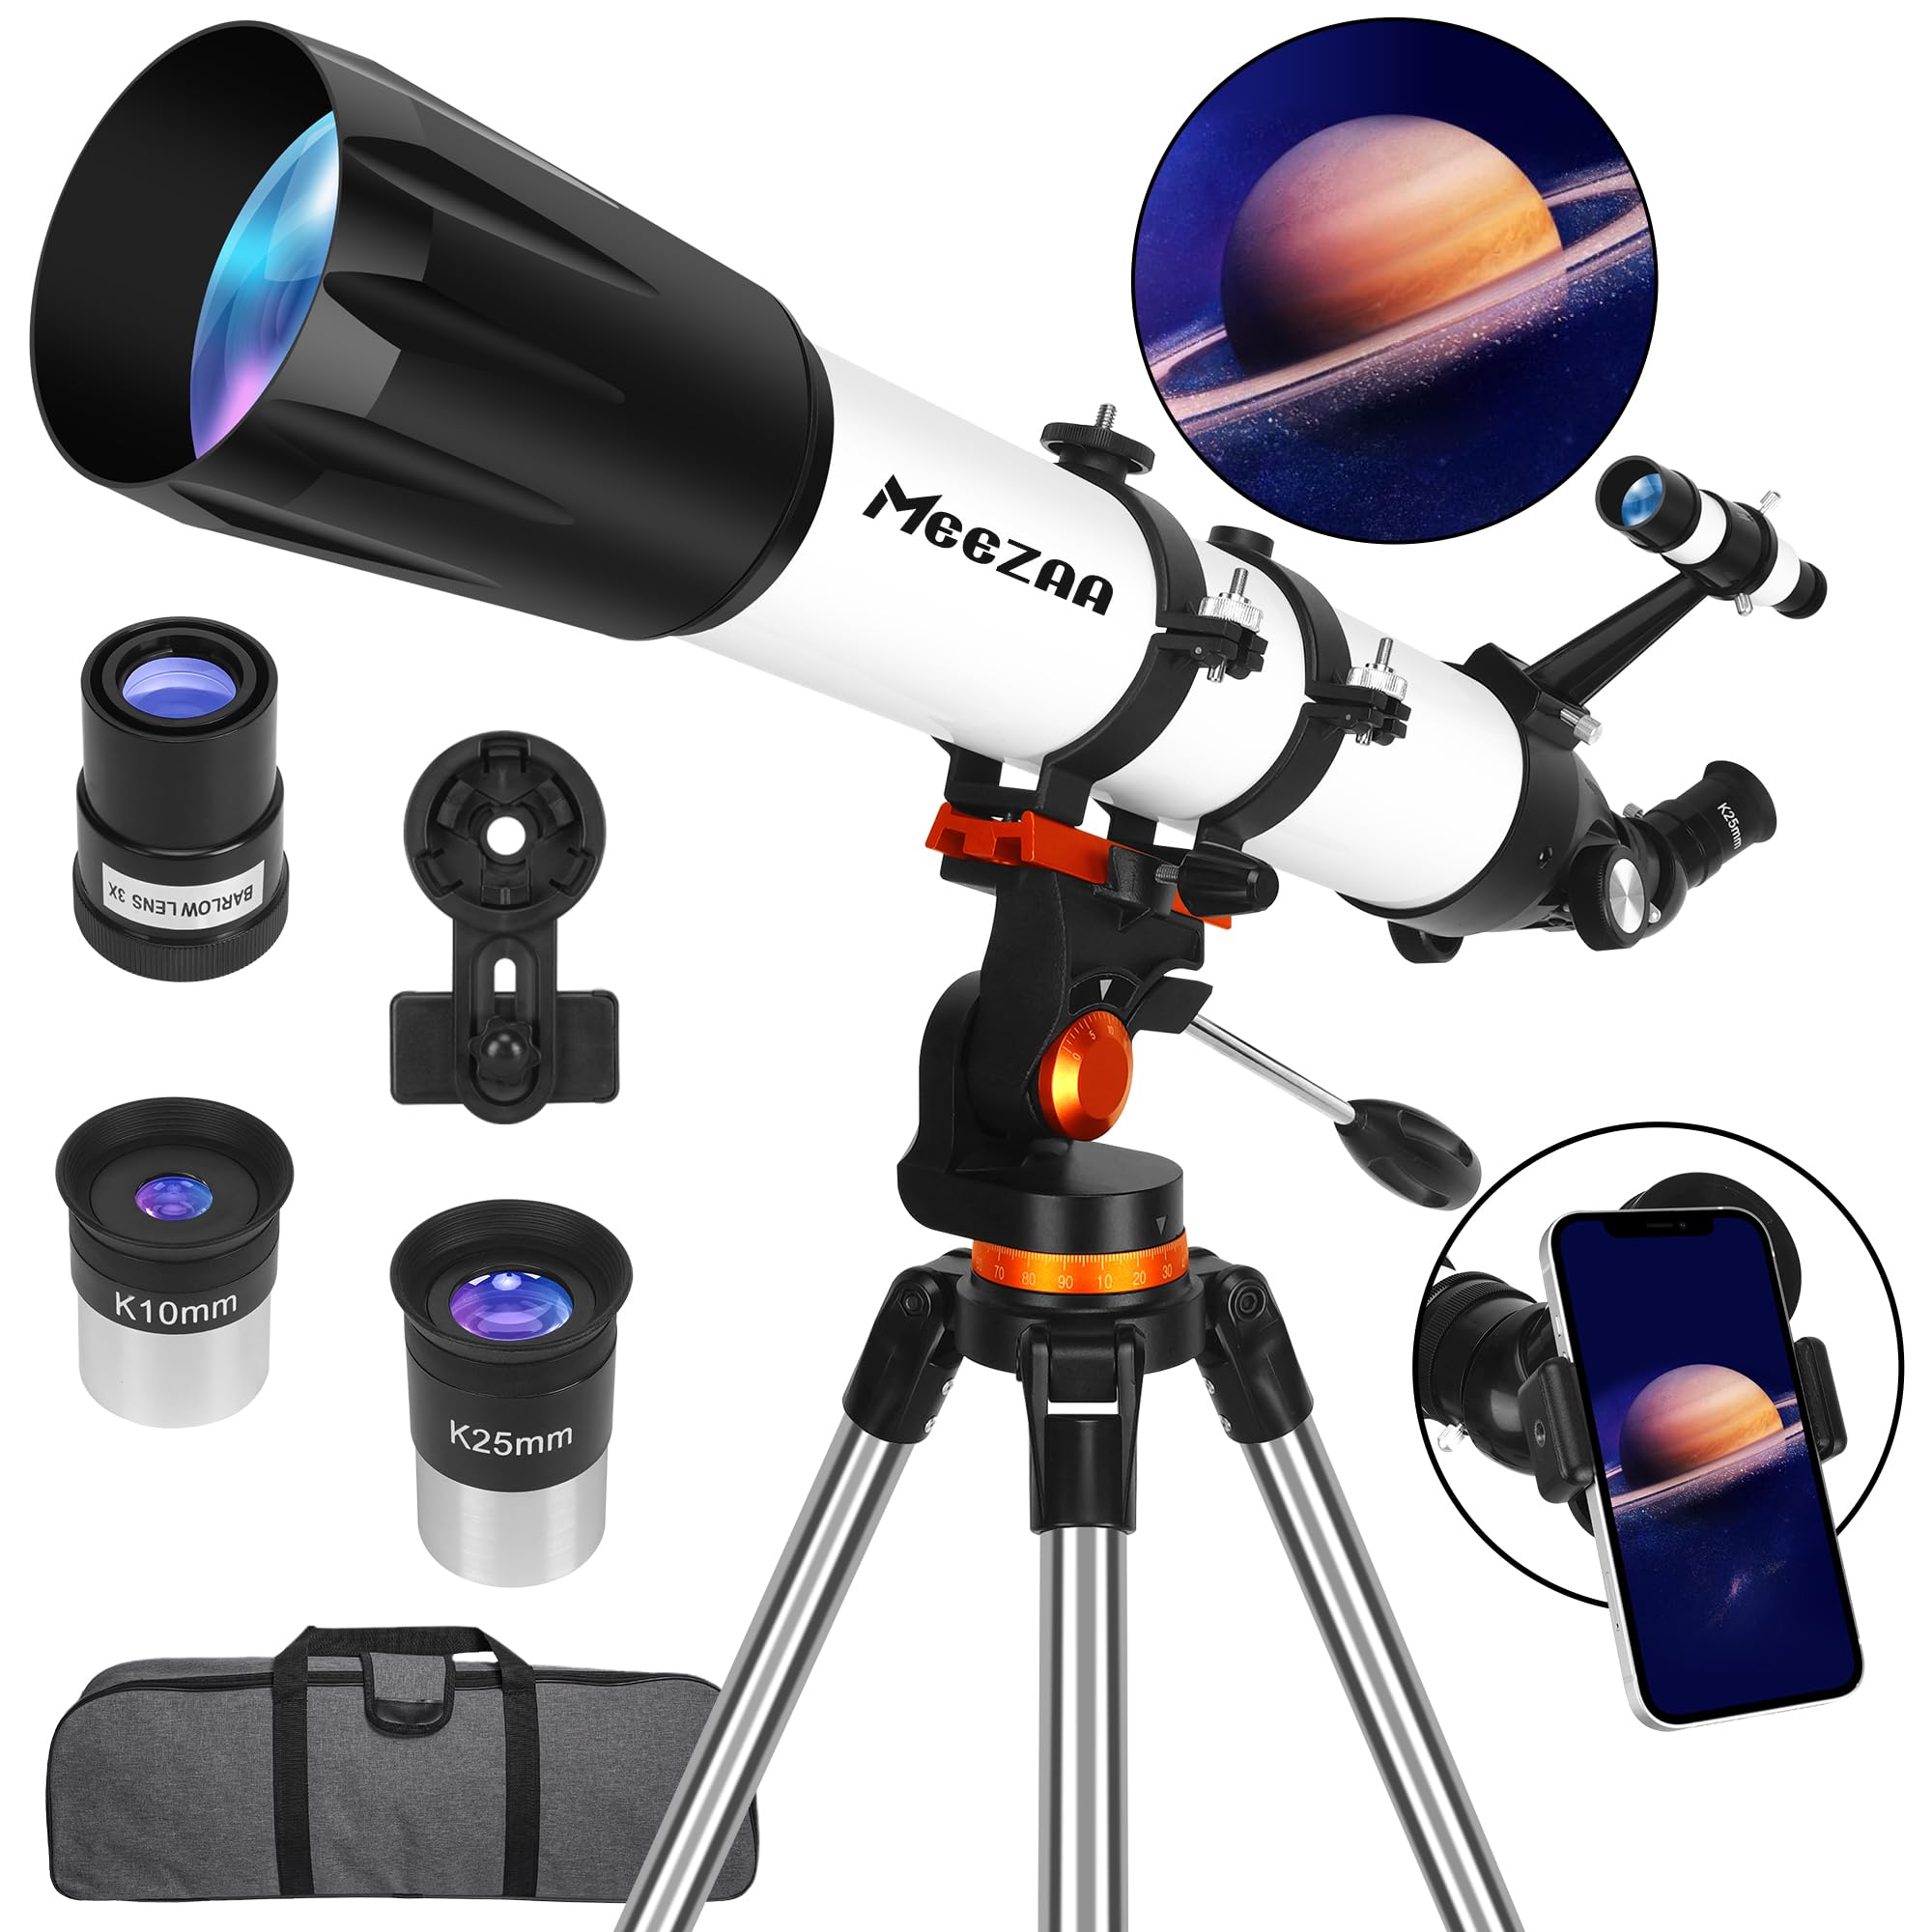 MEEZAA Telescope, Astronomy Telescope for Adults High Powered, 90mm Aperture 800mm Professional Refractor Telescopes for Kids & Beginners, Multi-Coated High Transmission with Phone Adapter Carry Bag